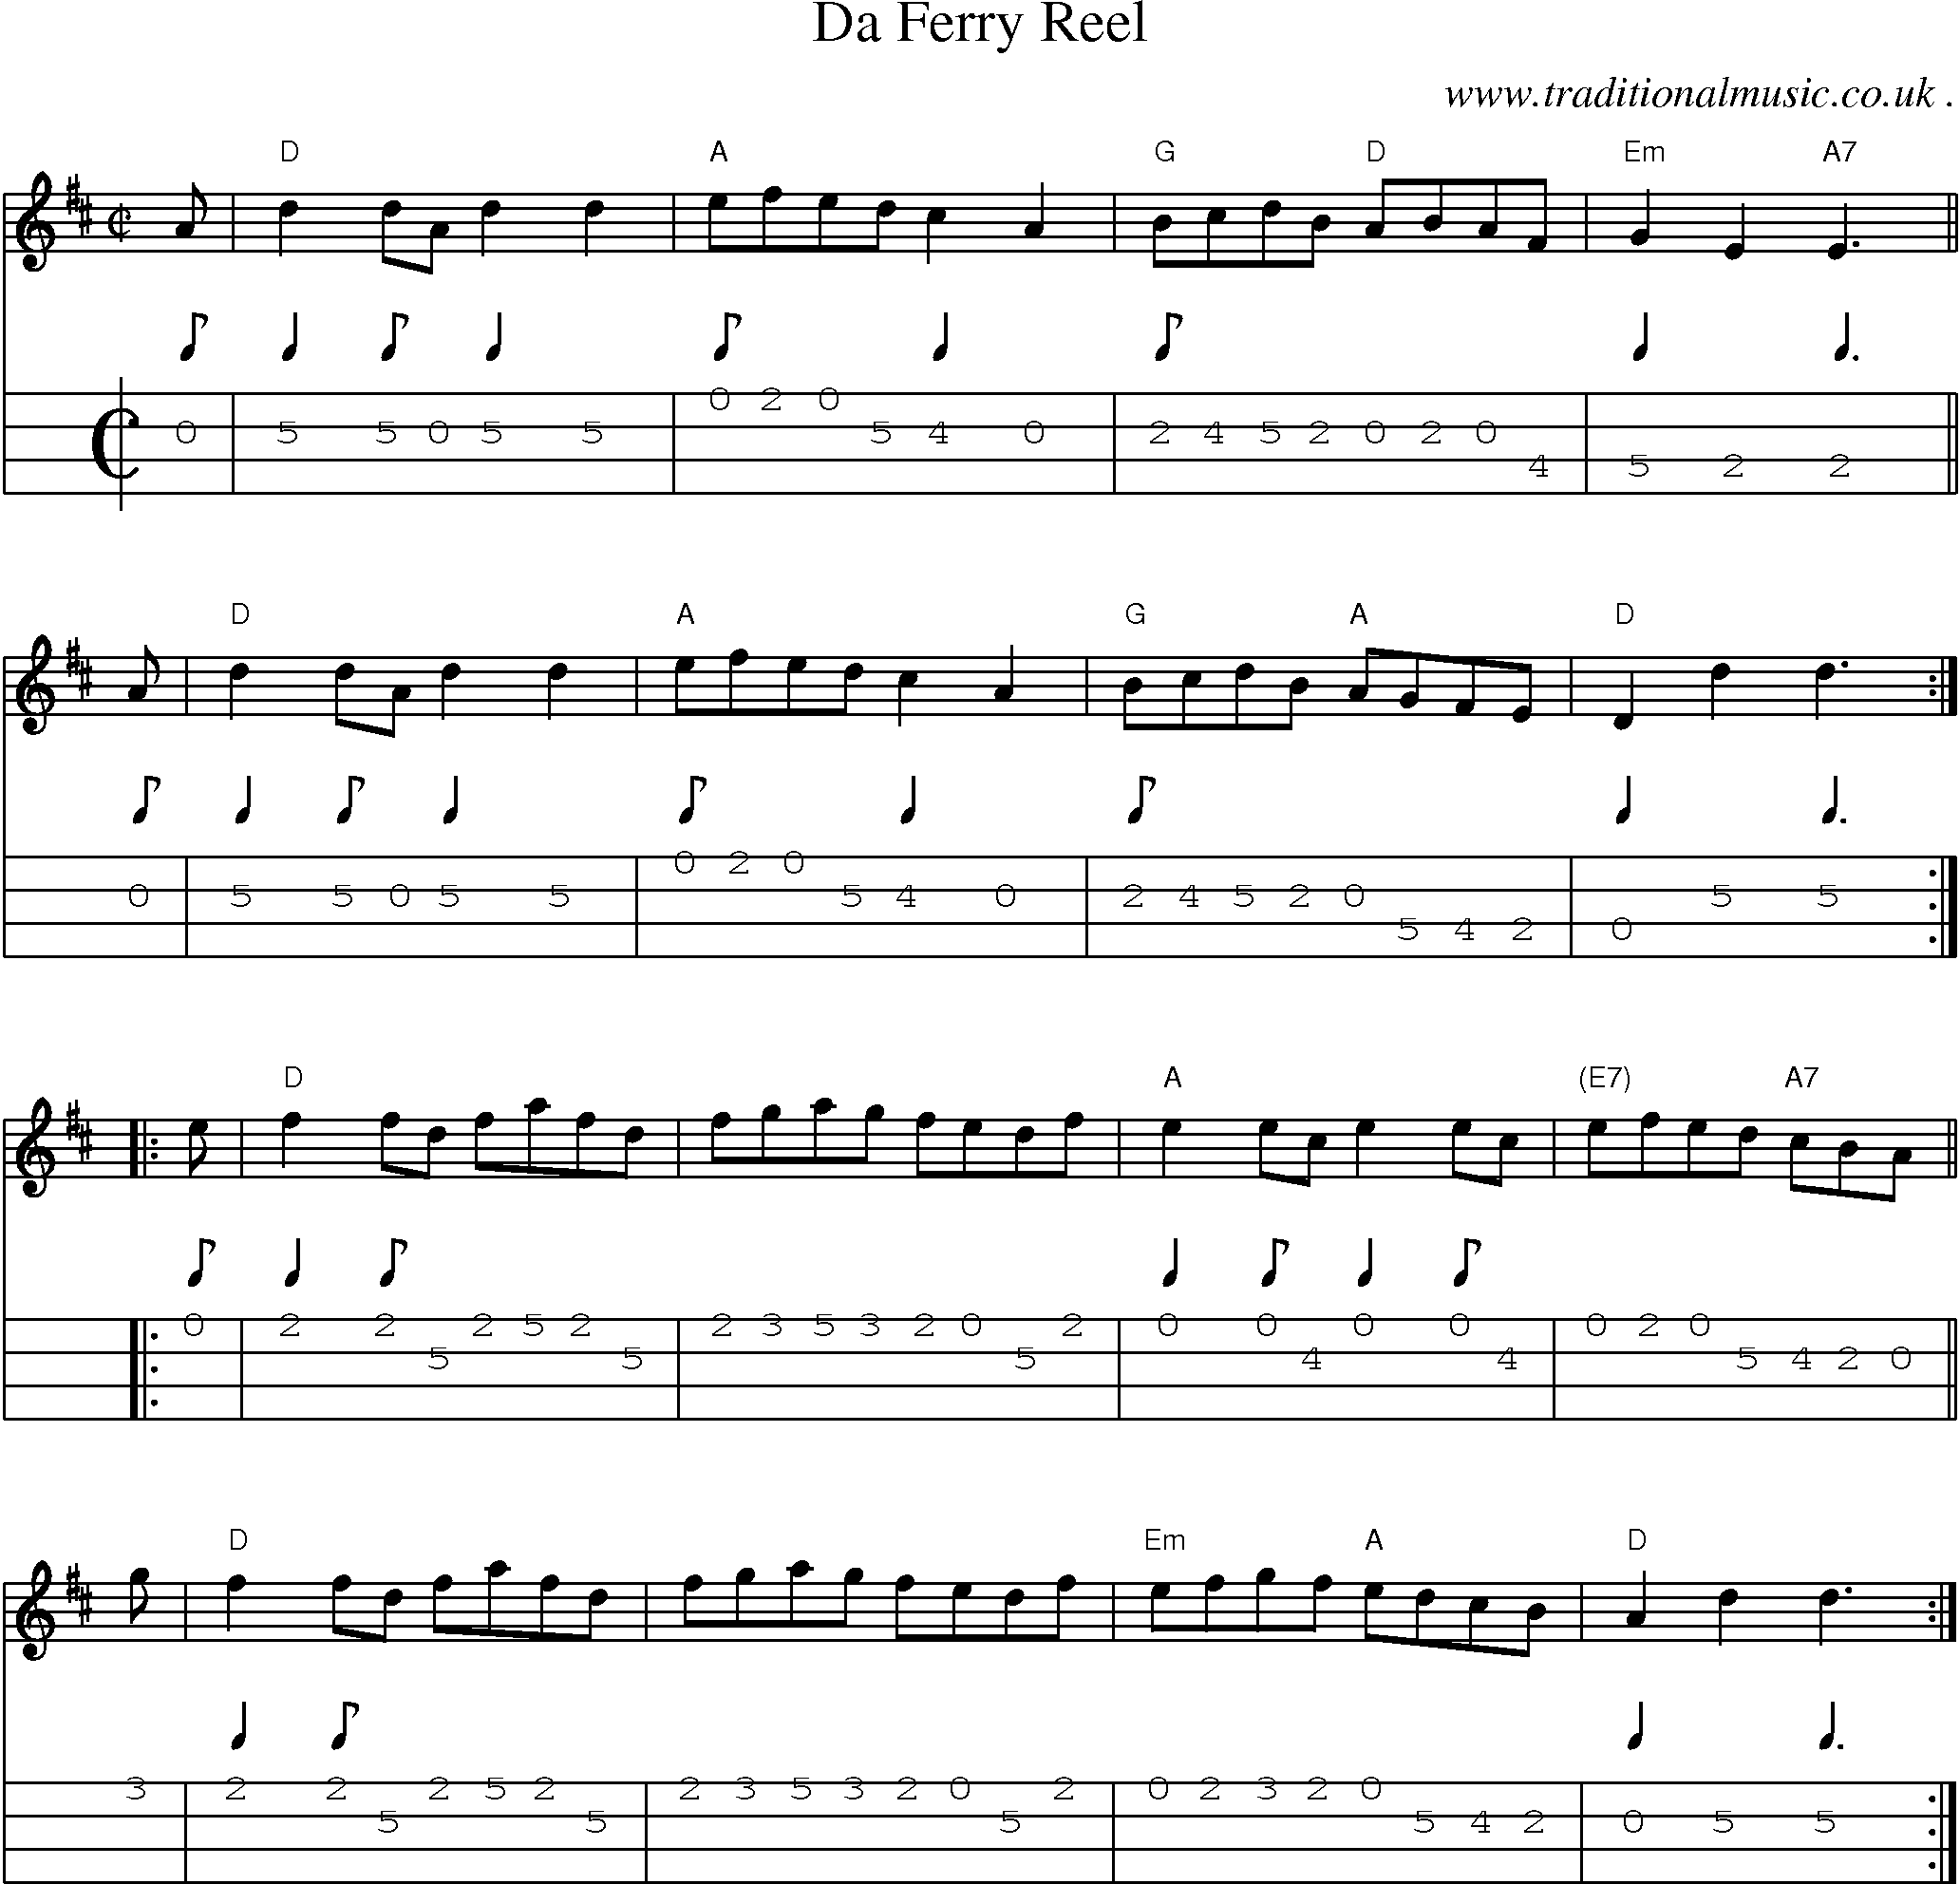 Sheet-music  score, Chords and Mandolin Tabs for Da Ferry Reel